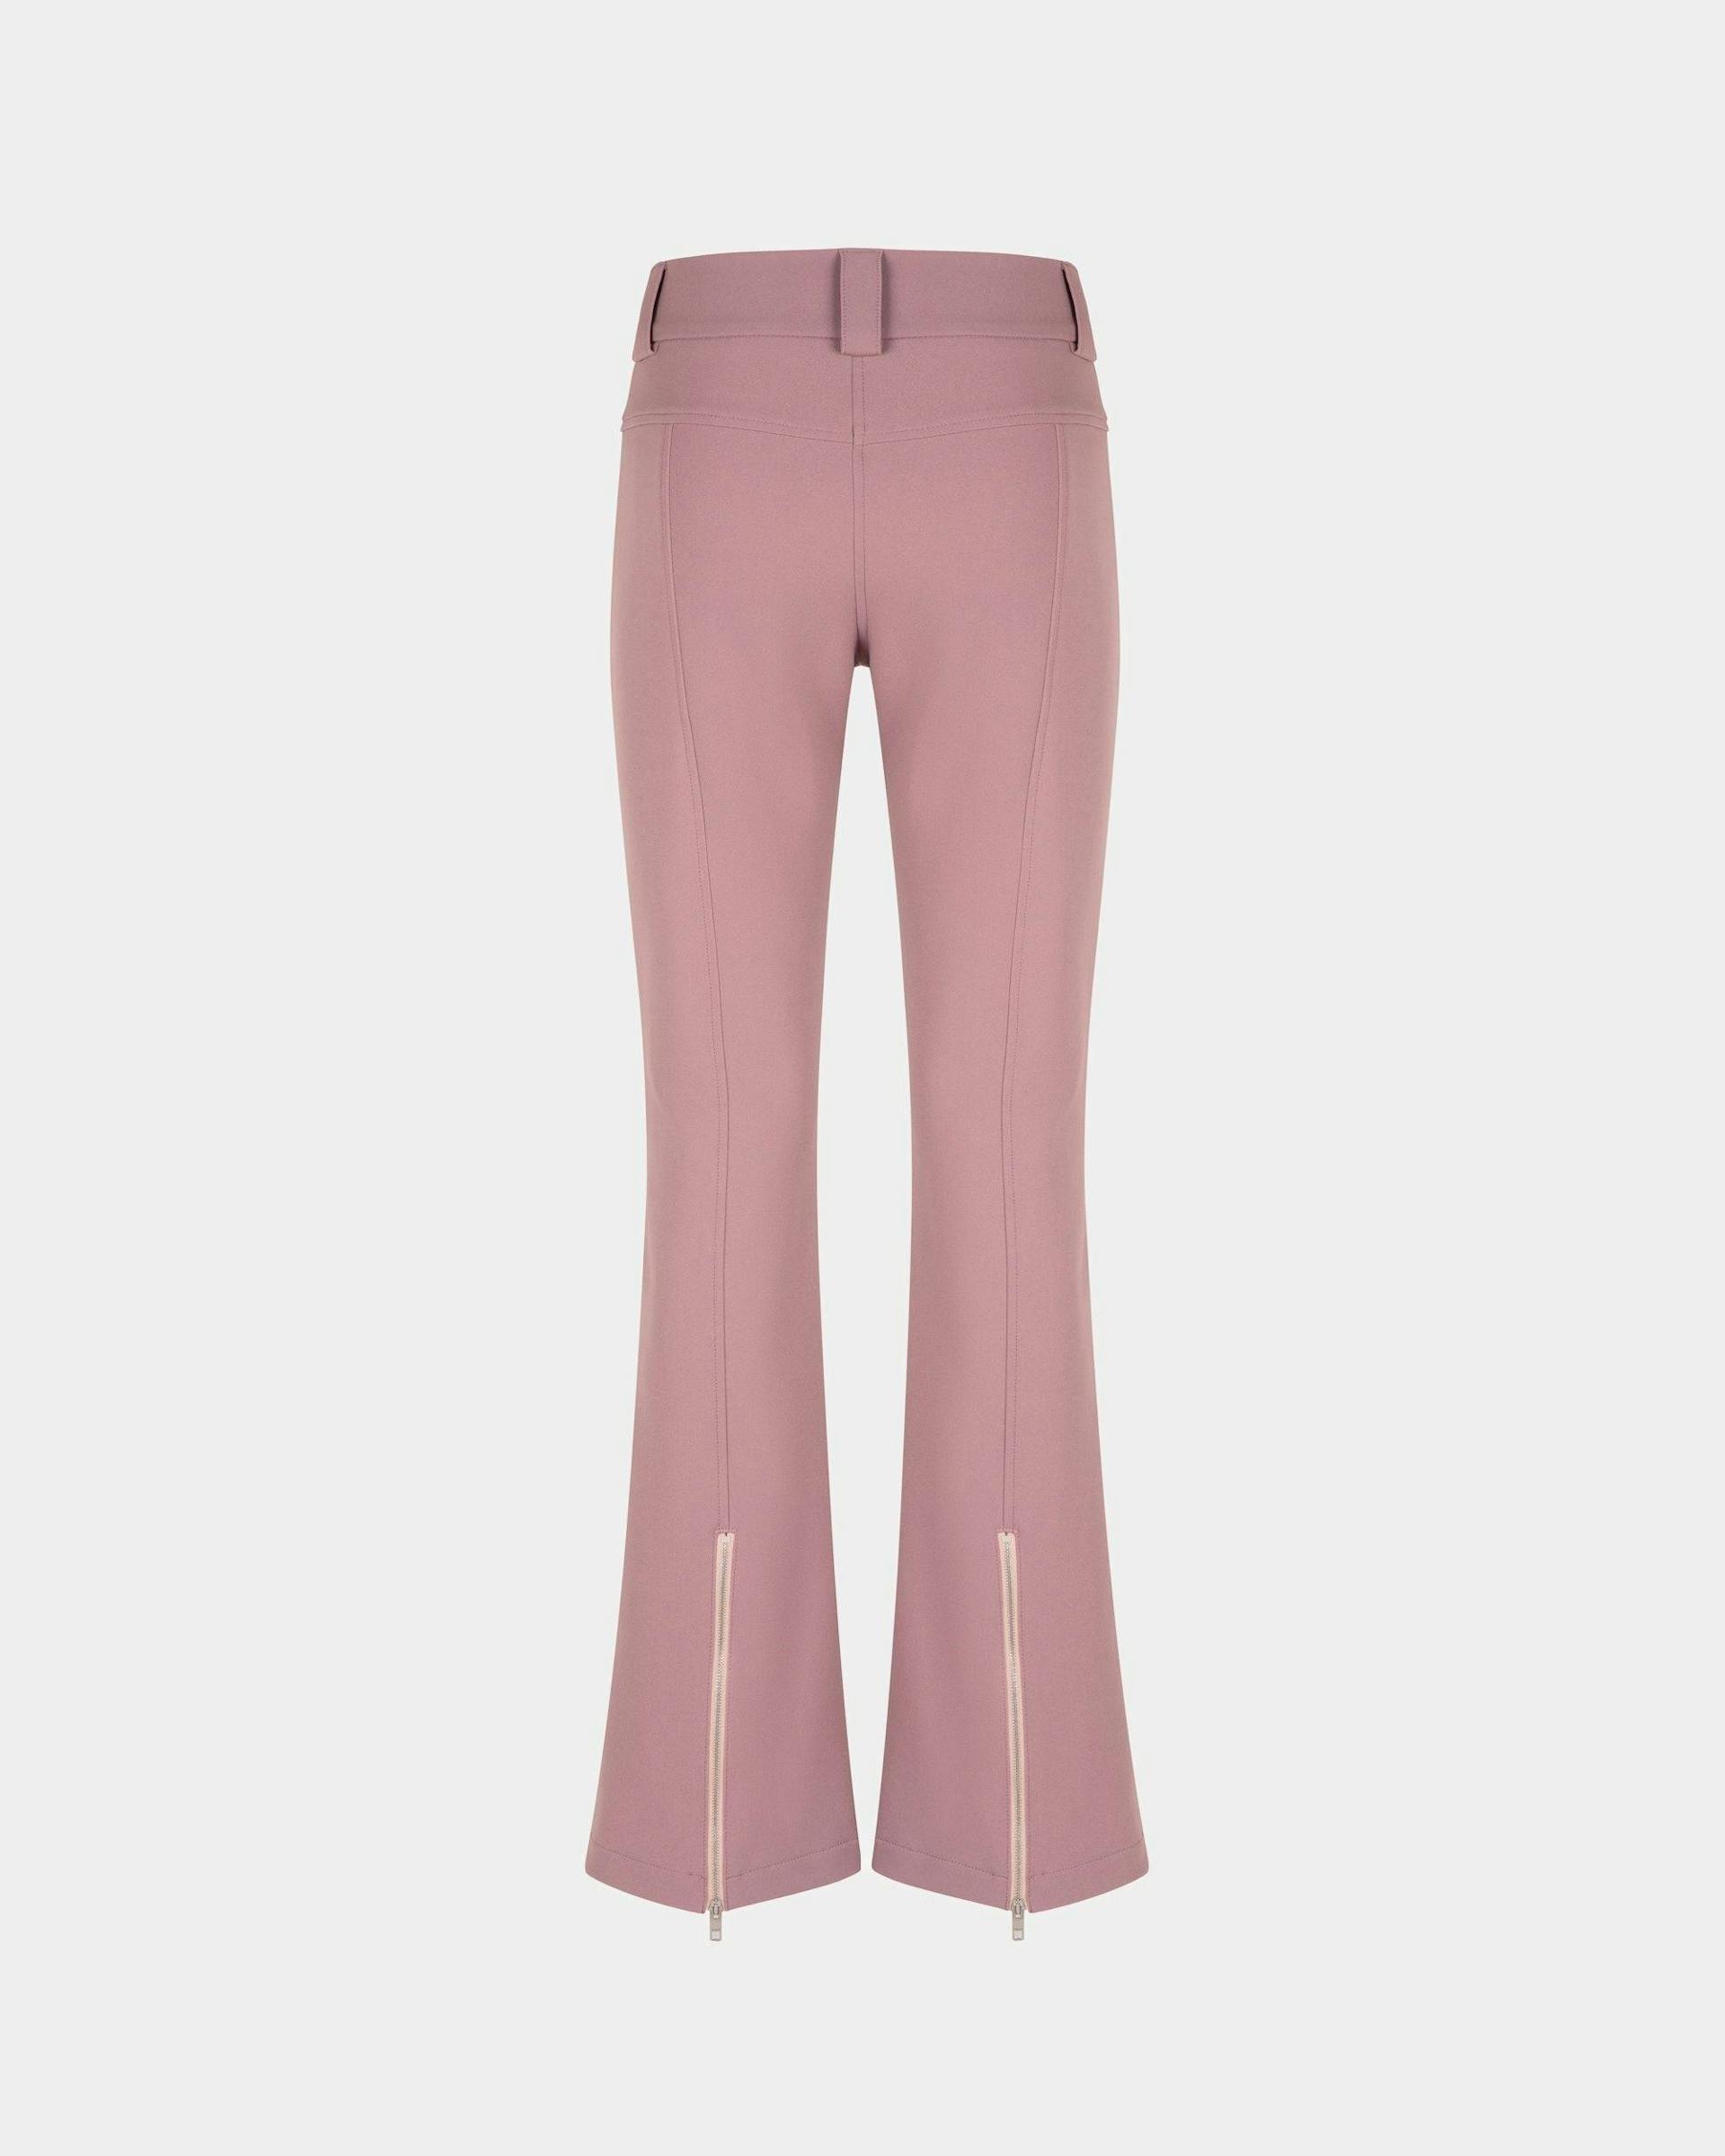 Women's Flared Stretch Pants In Light Pink | Bally | Still Life Back